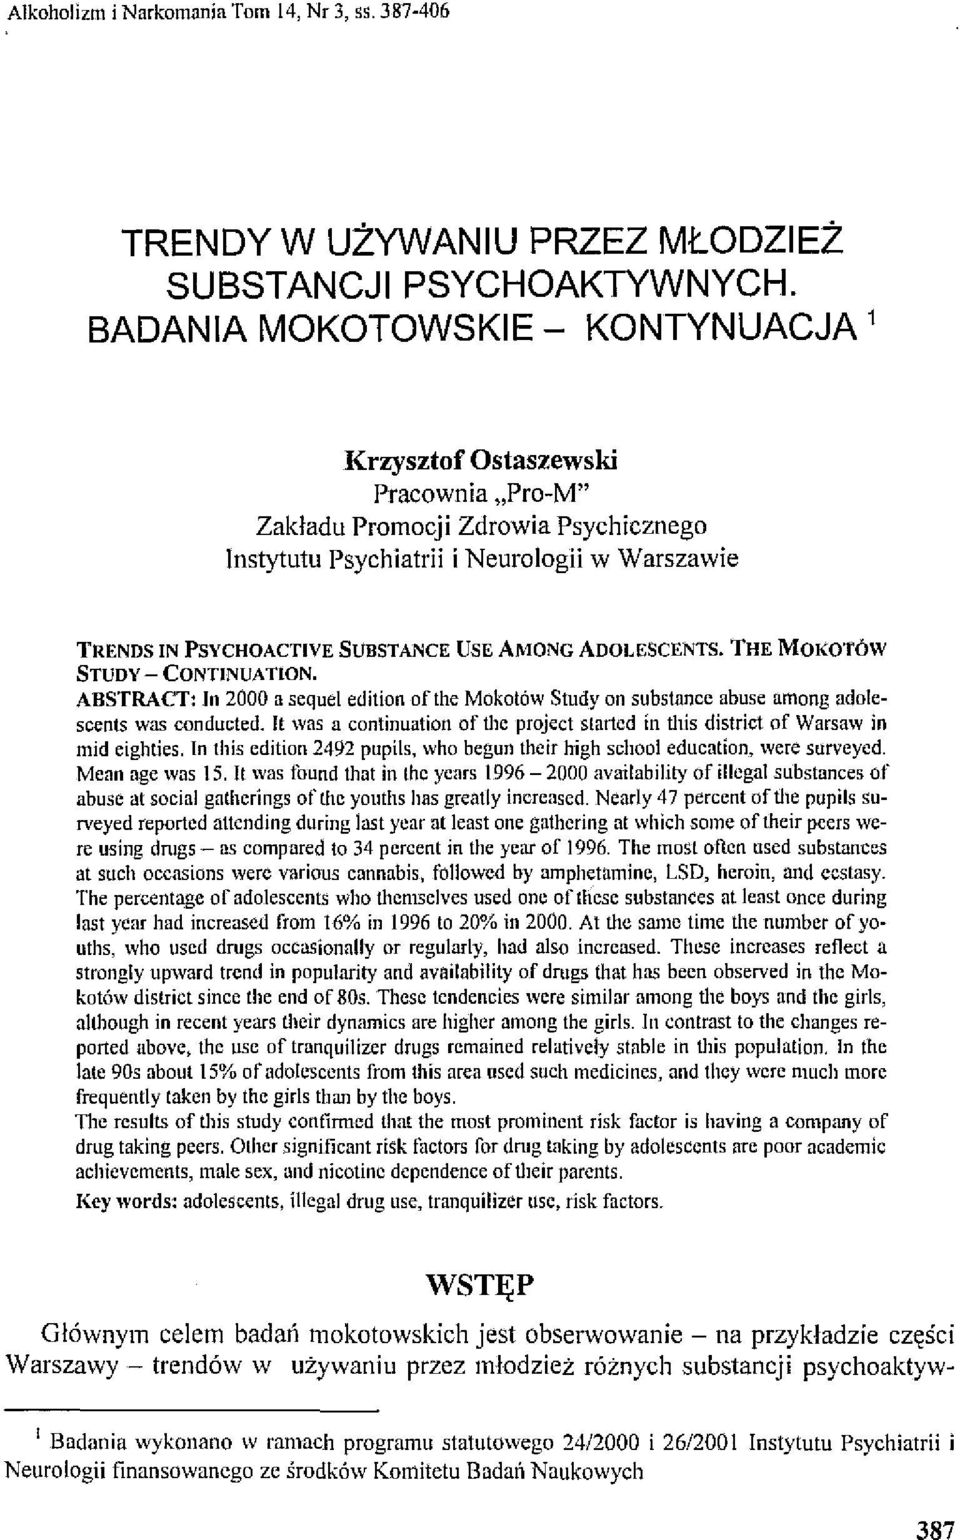 Al\0NG ADOLESCENTS. THE MOKOTÓW STUDV - CONTINUATION. ABSTRACT: In 2000 a sequel edition ofthe Mokotów Studyon substance abuse arnong adolescents was conduetcd.